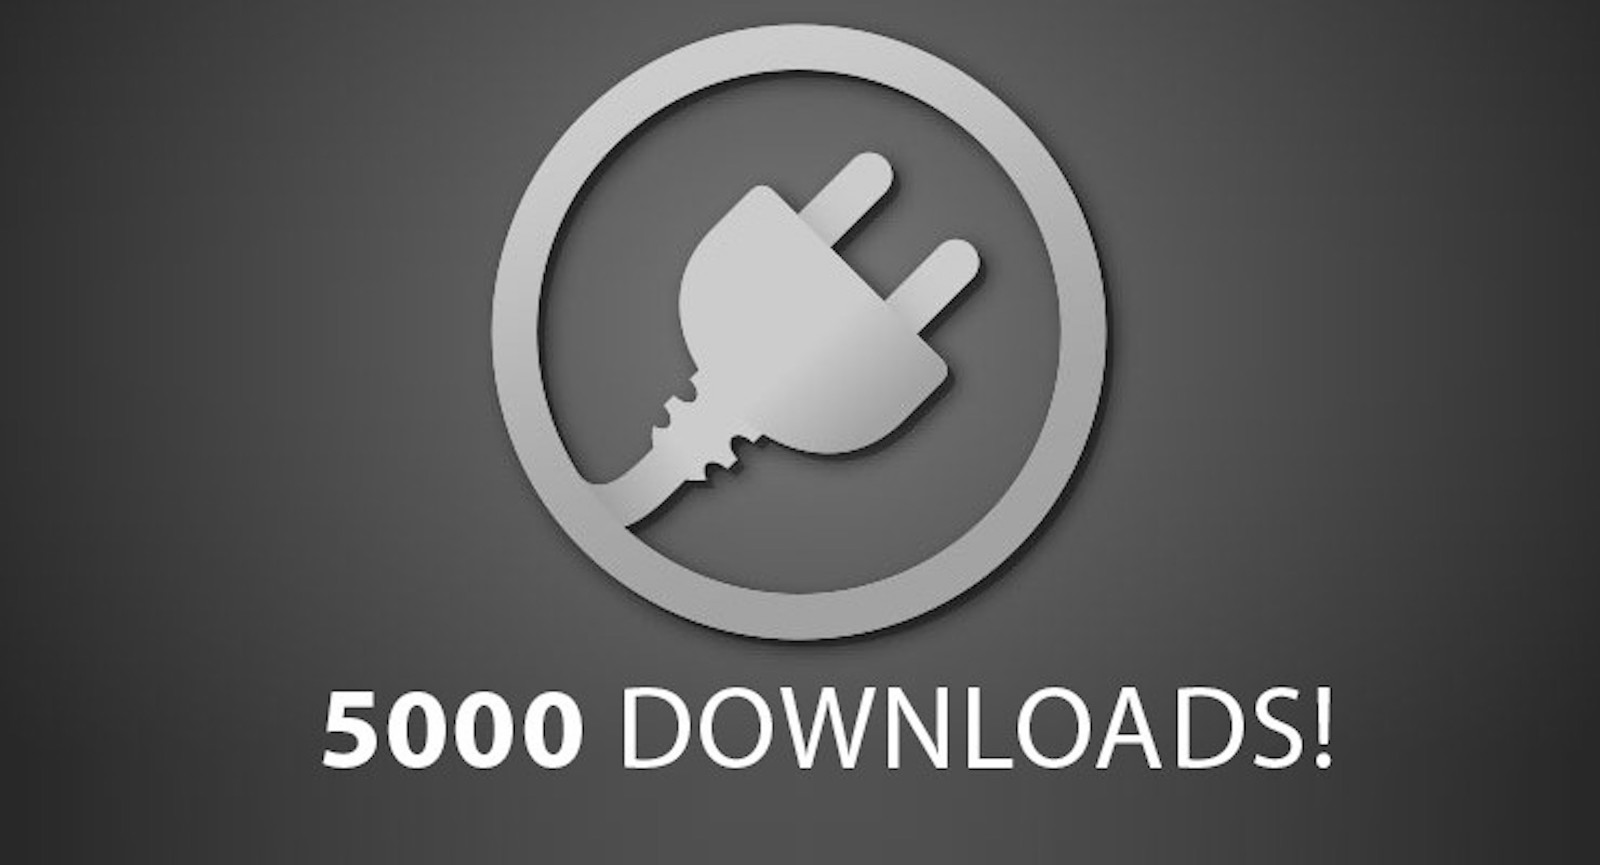 More than 5000 plugins sold!